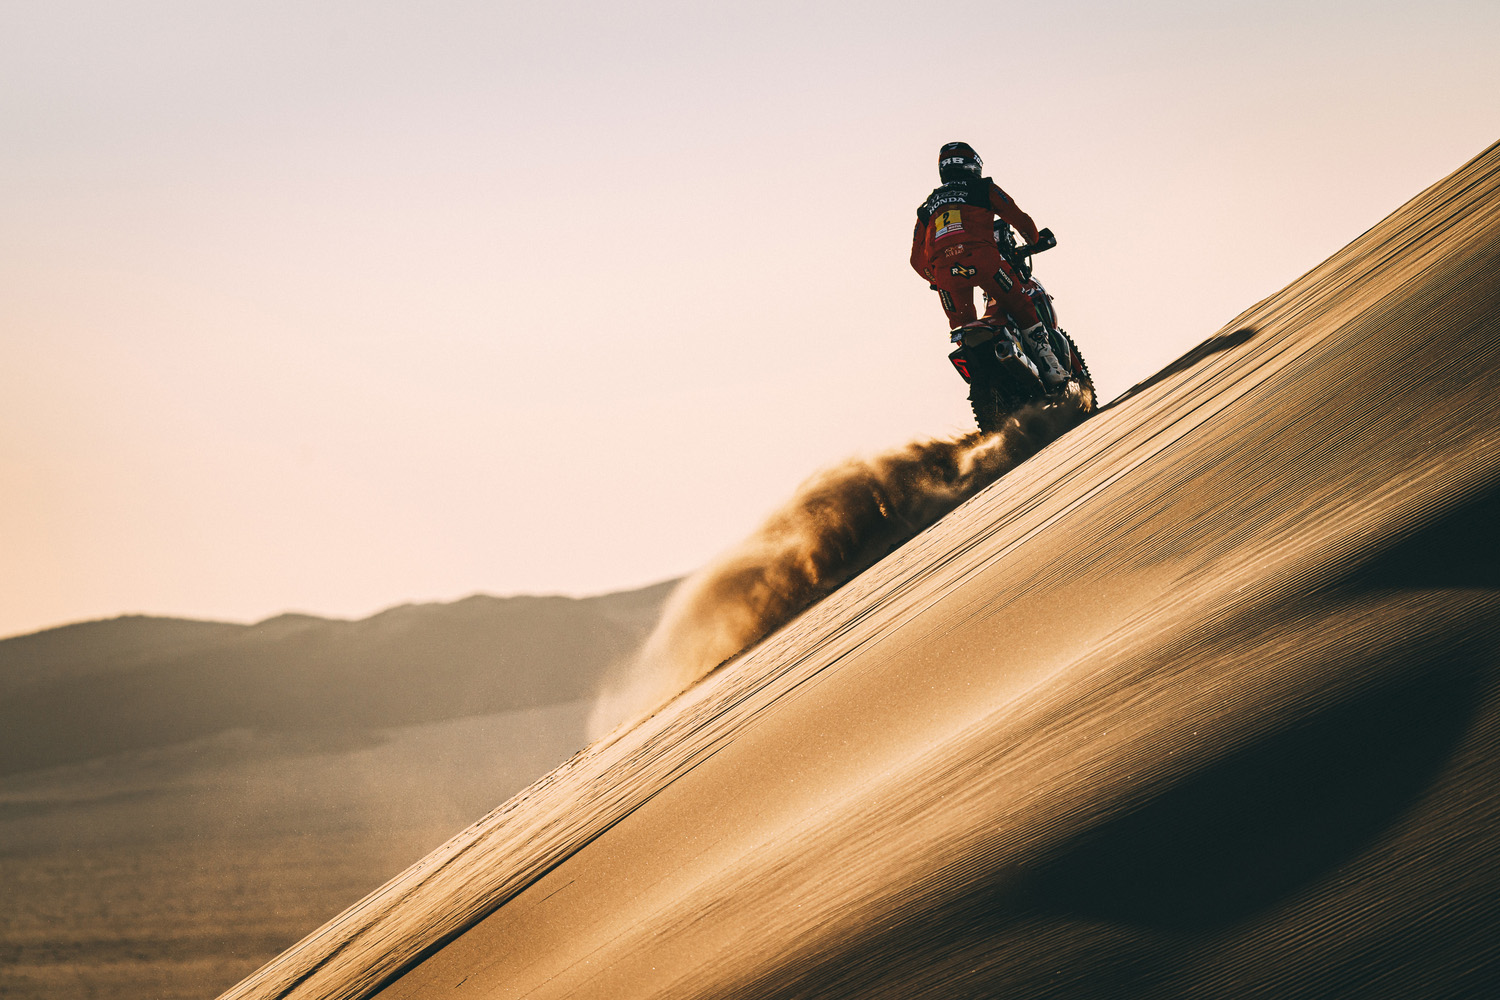 2022 Dakar Rally Notebook: stage 8 – “If you want to win the race, you have to win stages”